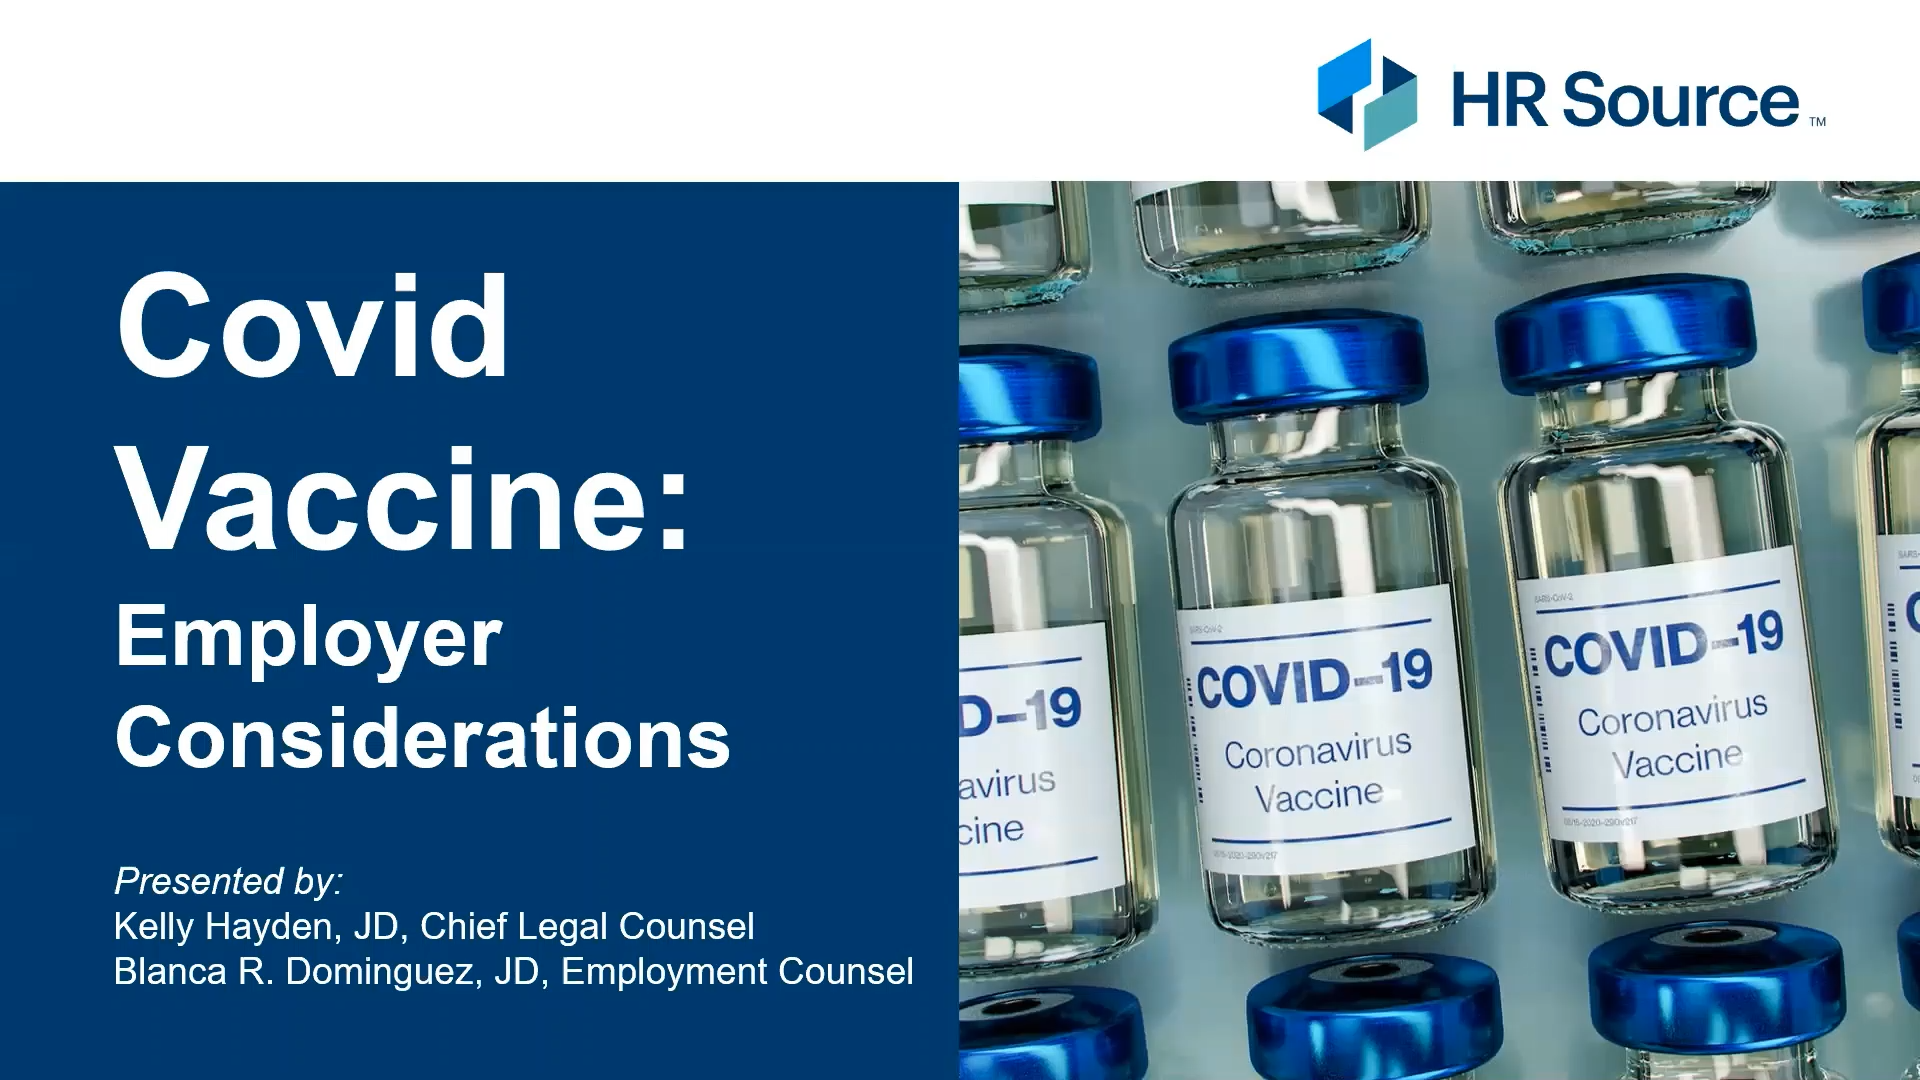 The COVID-19 Vaccine: Employer Options